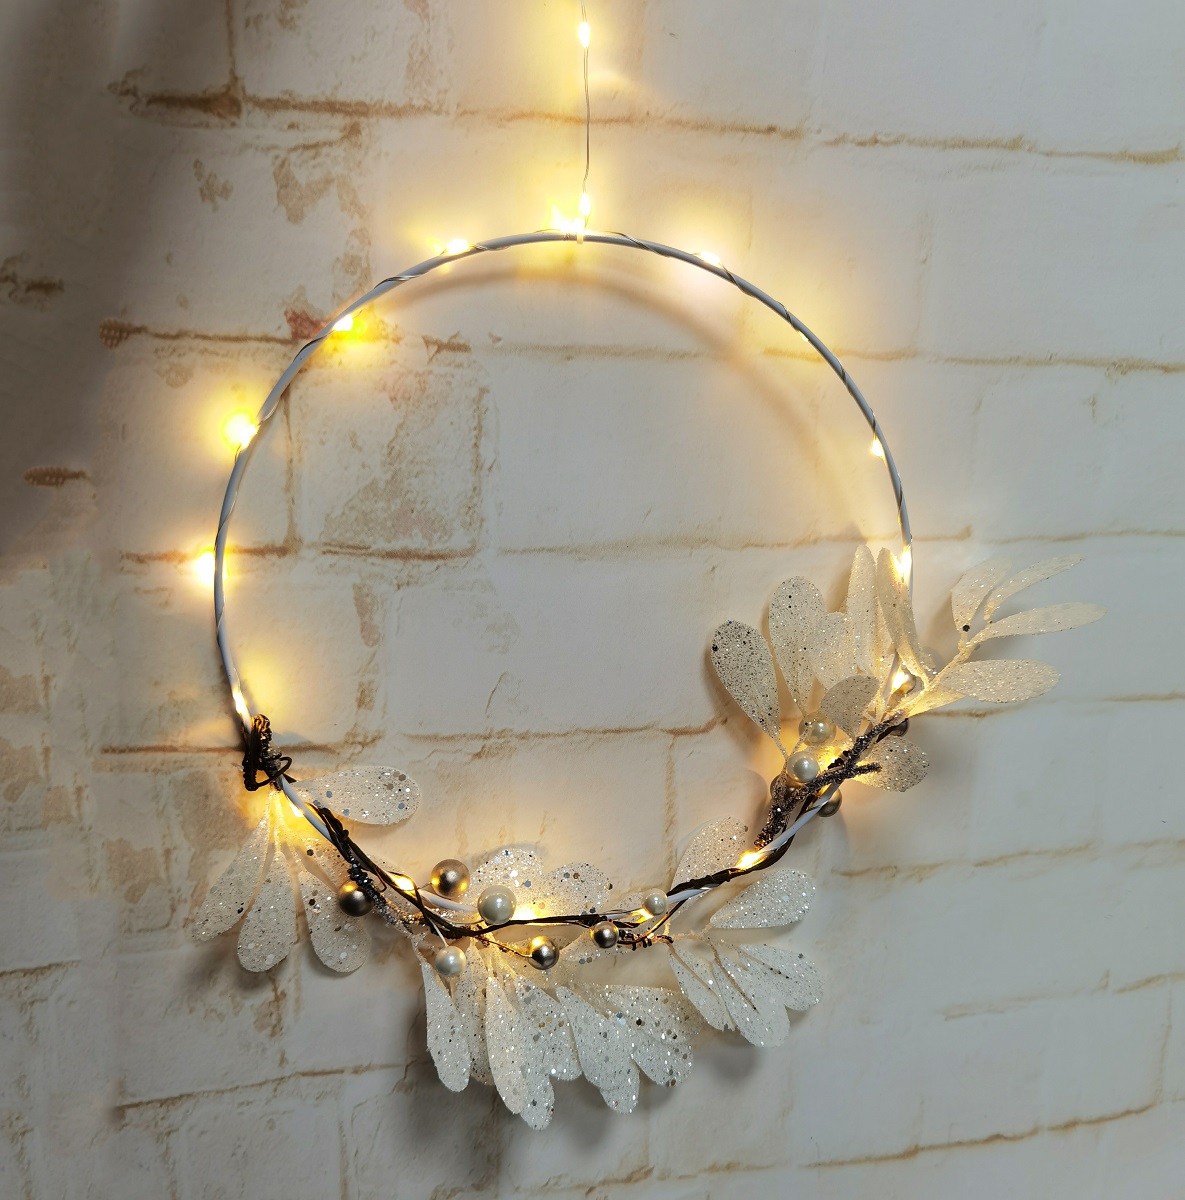 What are the introductions of Fairy Lights?